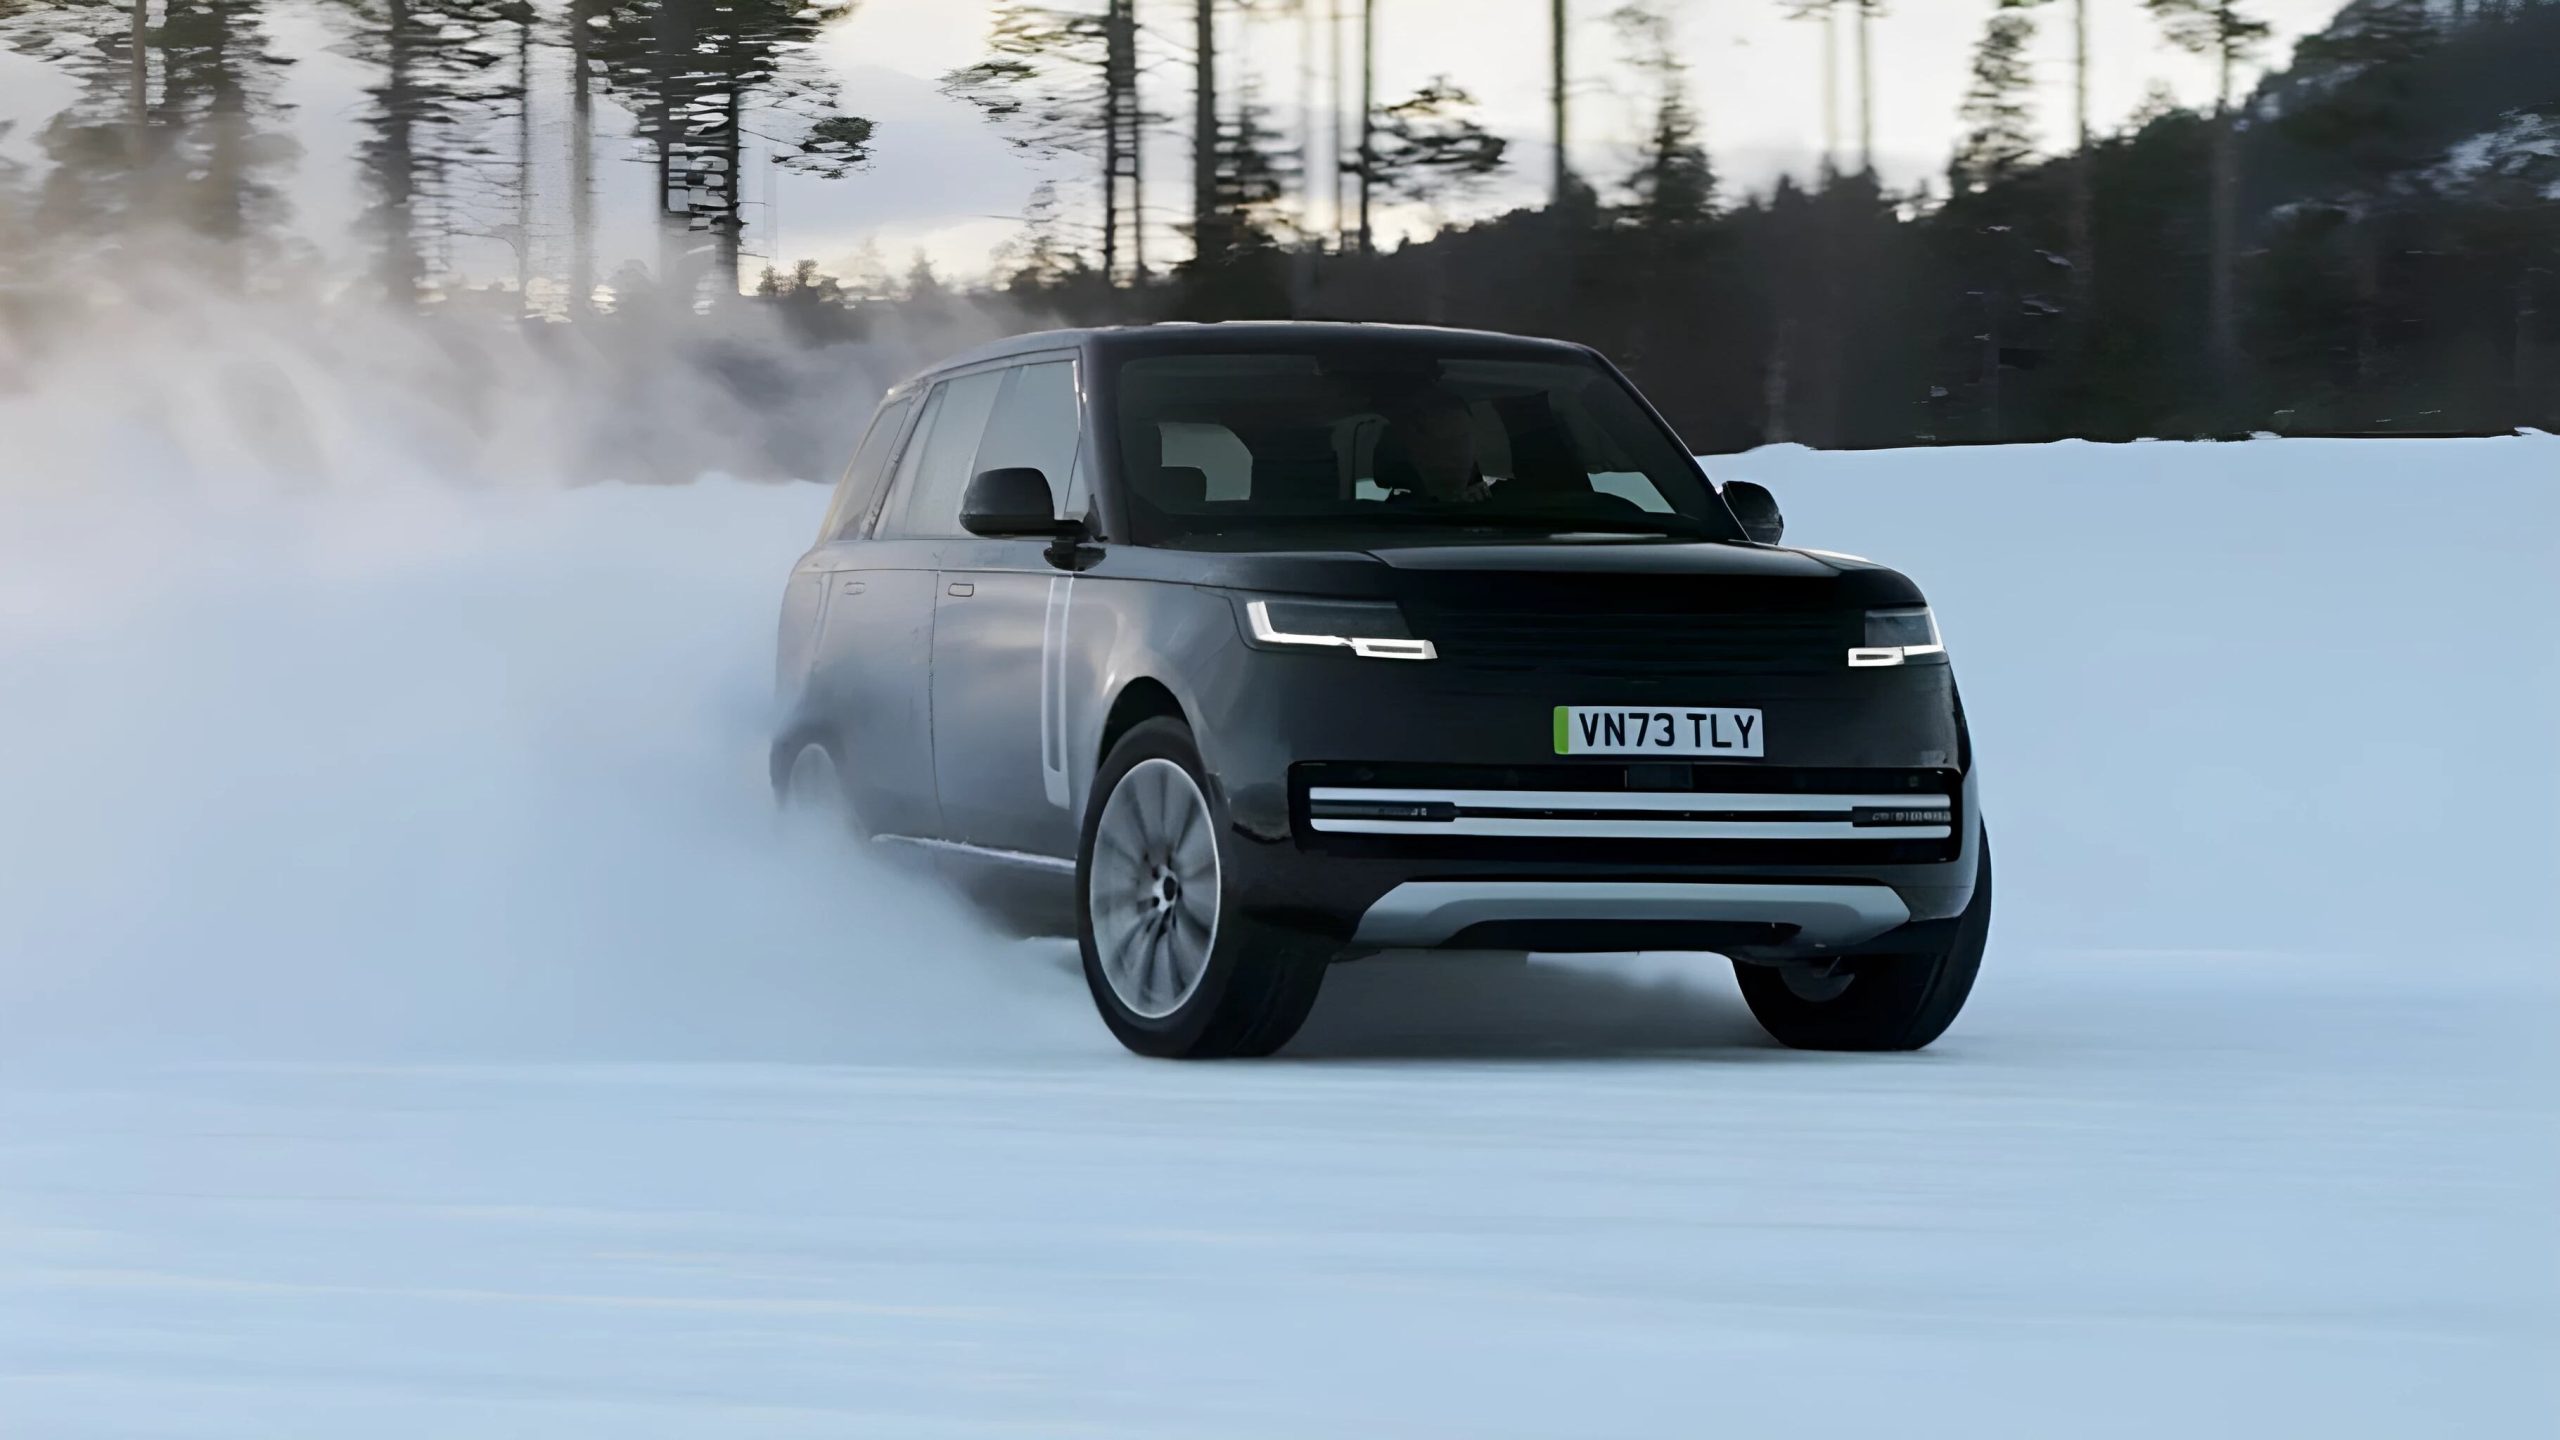 Range Rover's First Ever Electric Vehicle Prototype Getting Tested On The Frozen Lakes Of Sweden (Land Rover Newsroom)